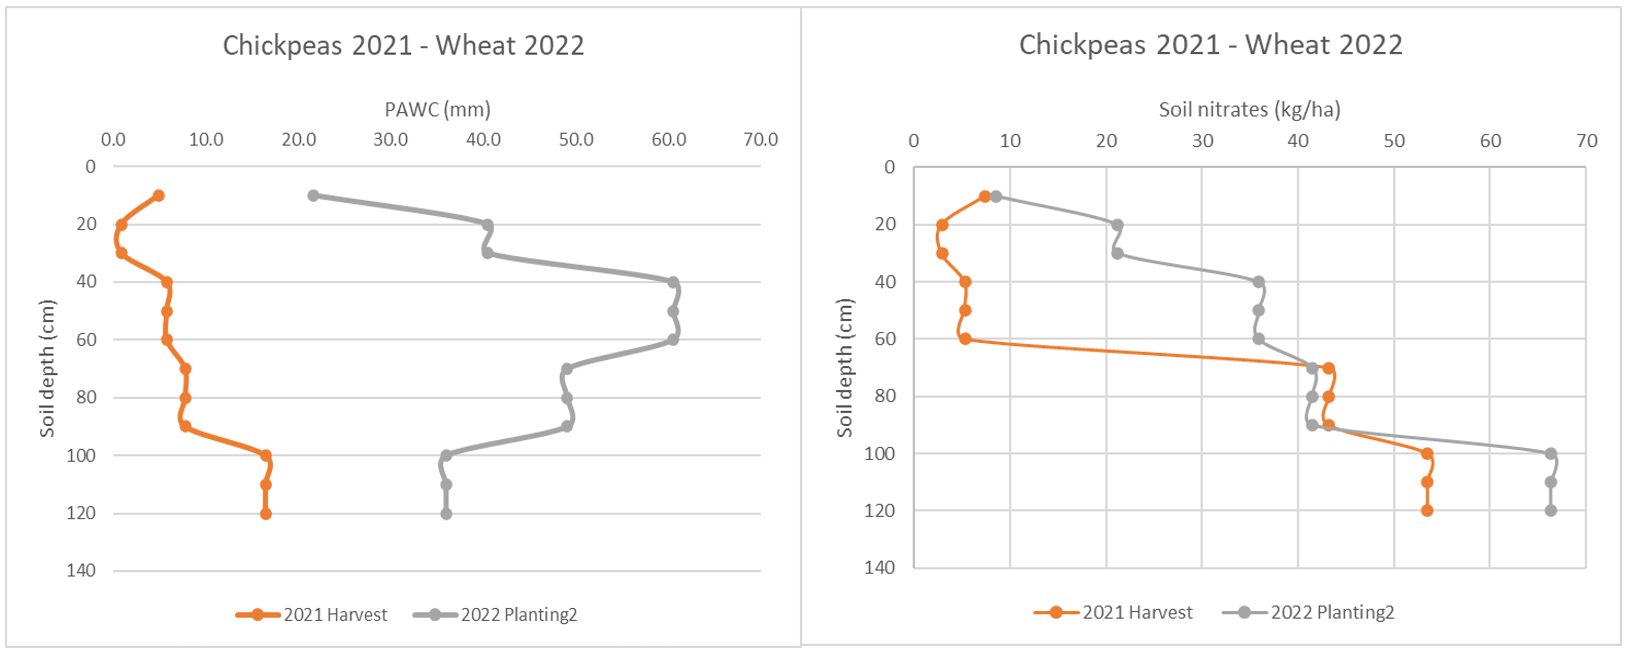 Side-by-side graphs showing mean PAWC and soil nitrates at chickpea harvest 2021 and wheat planting in 2022.